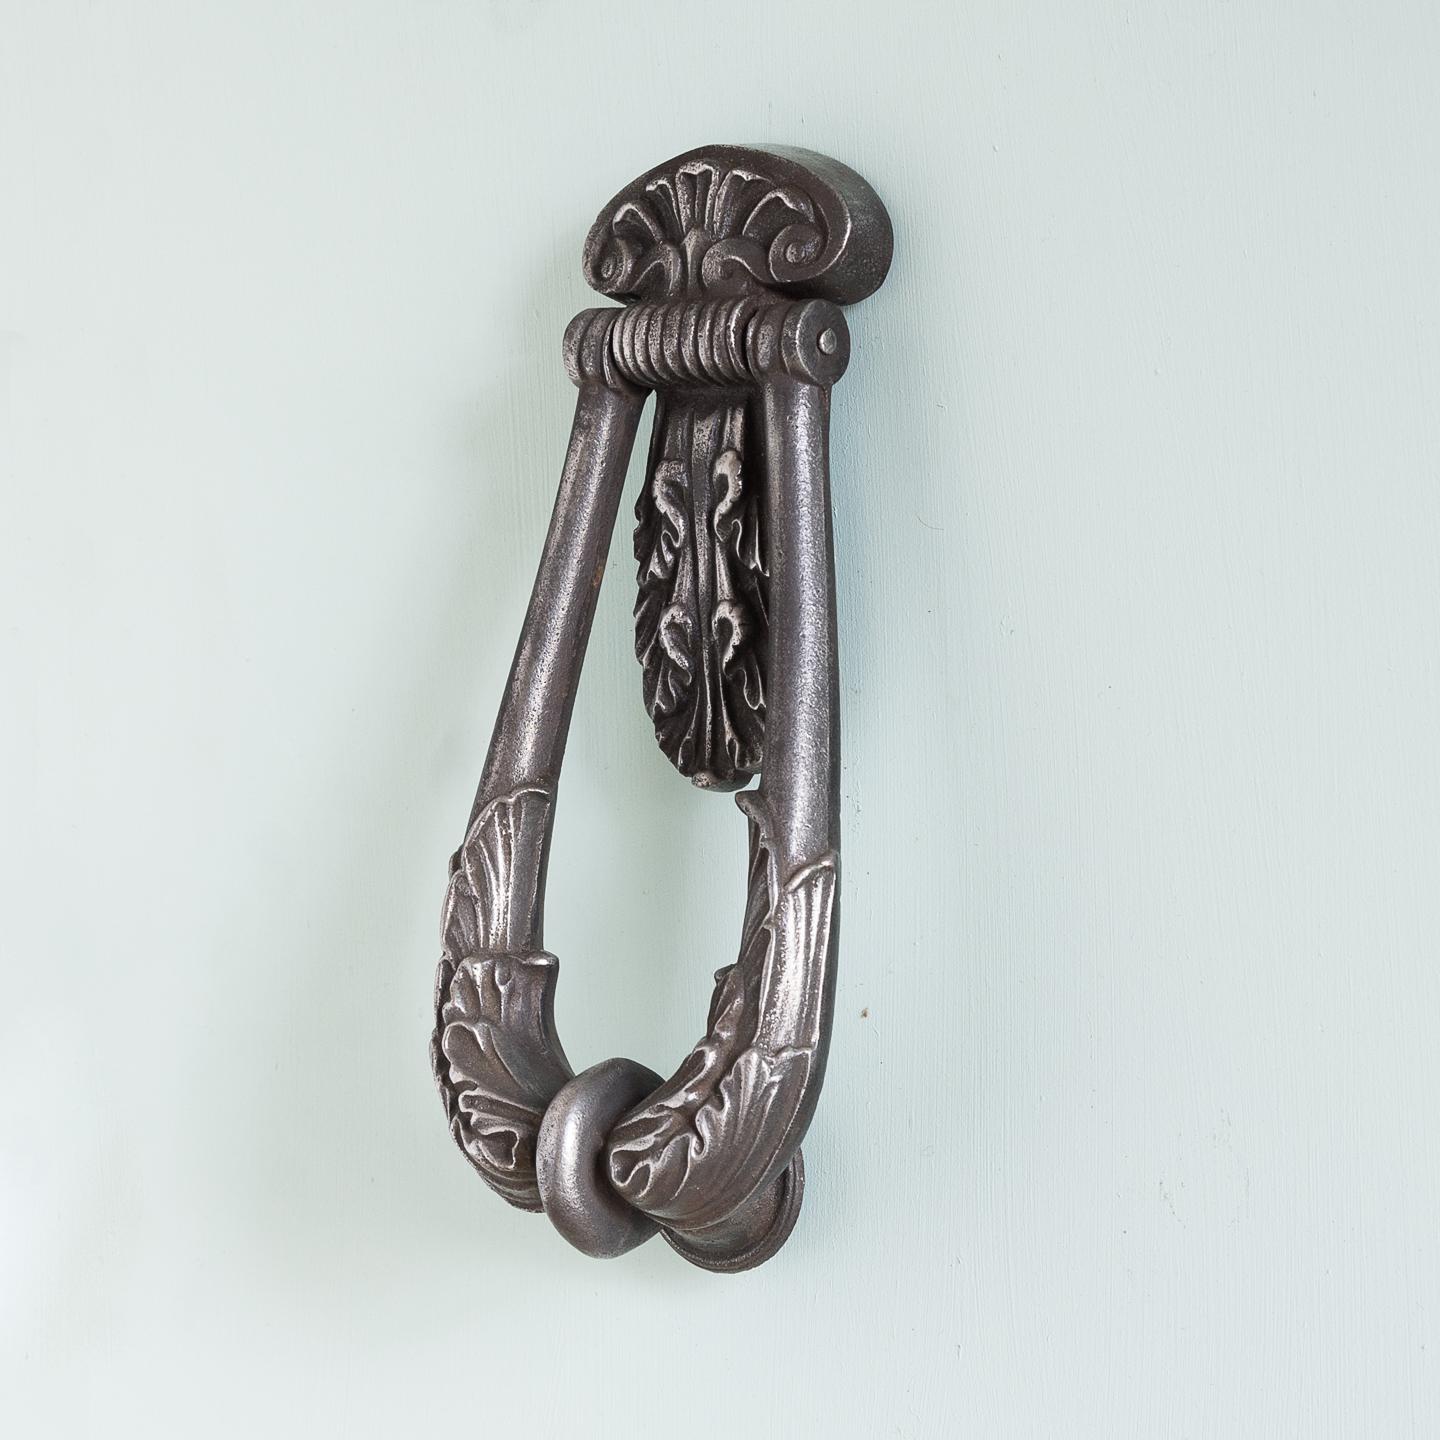 A Victorian cast iron door knocker made by Kenrick, of looped form with acanthus backplate, stamped 'A. Kenrick & Sons 365'.